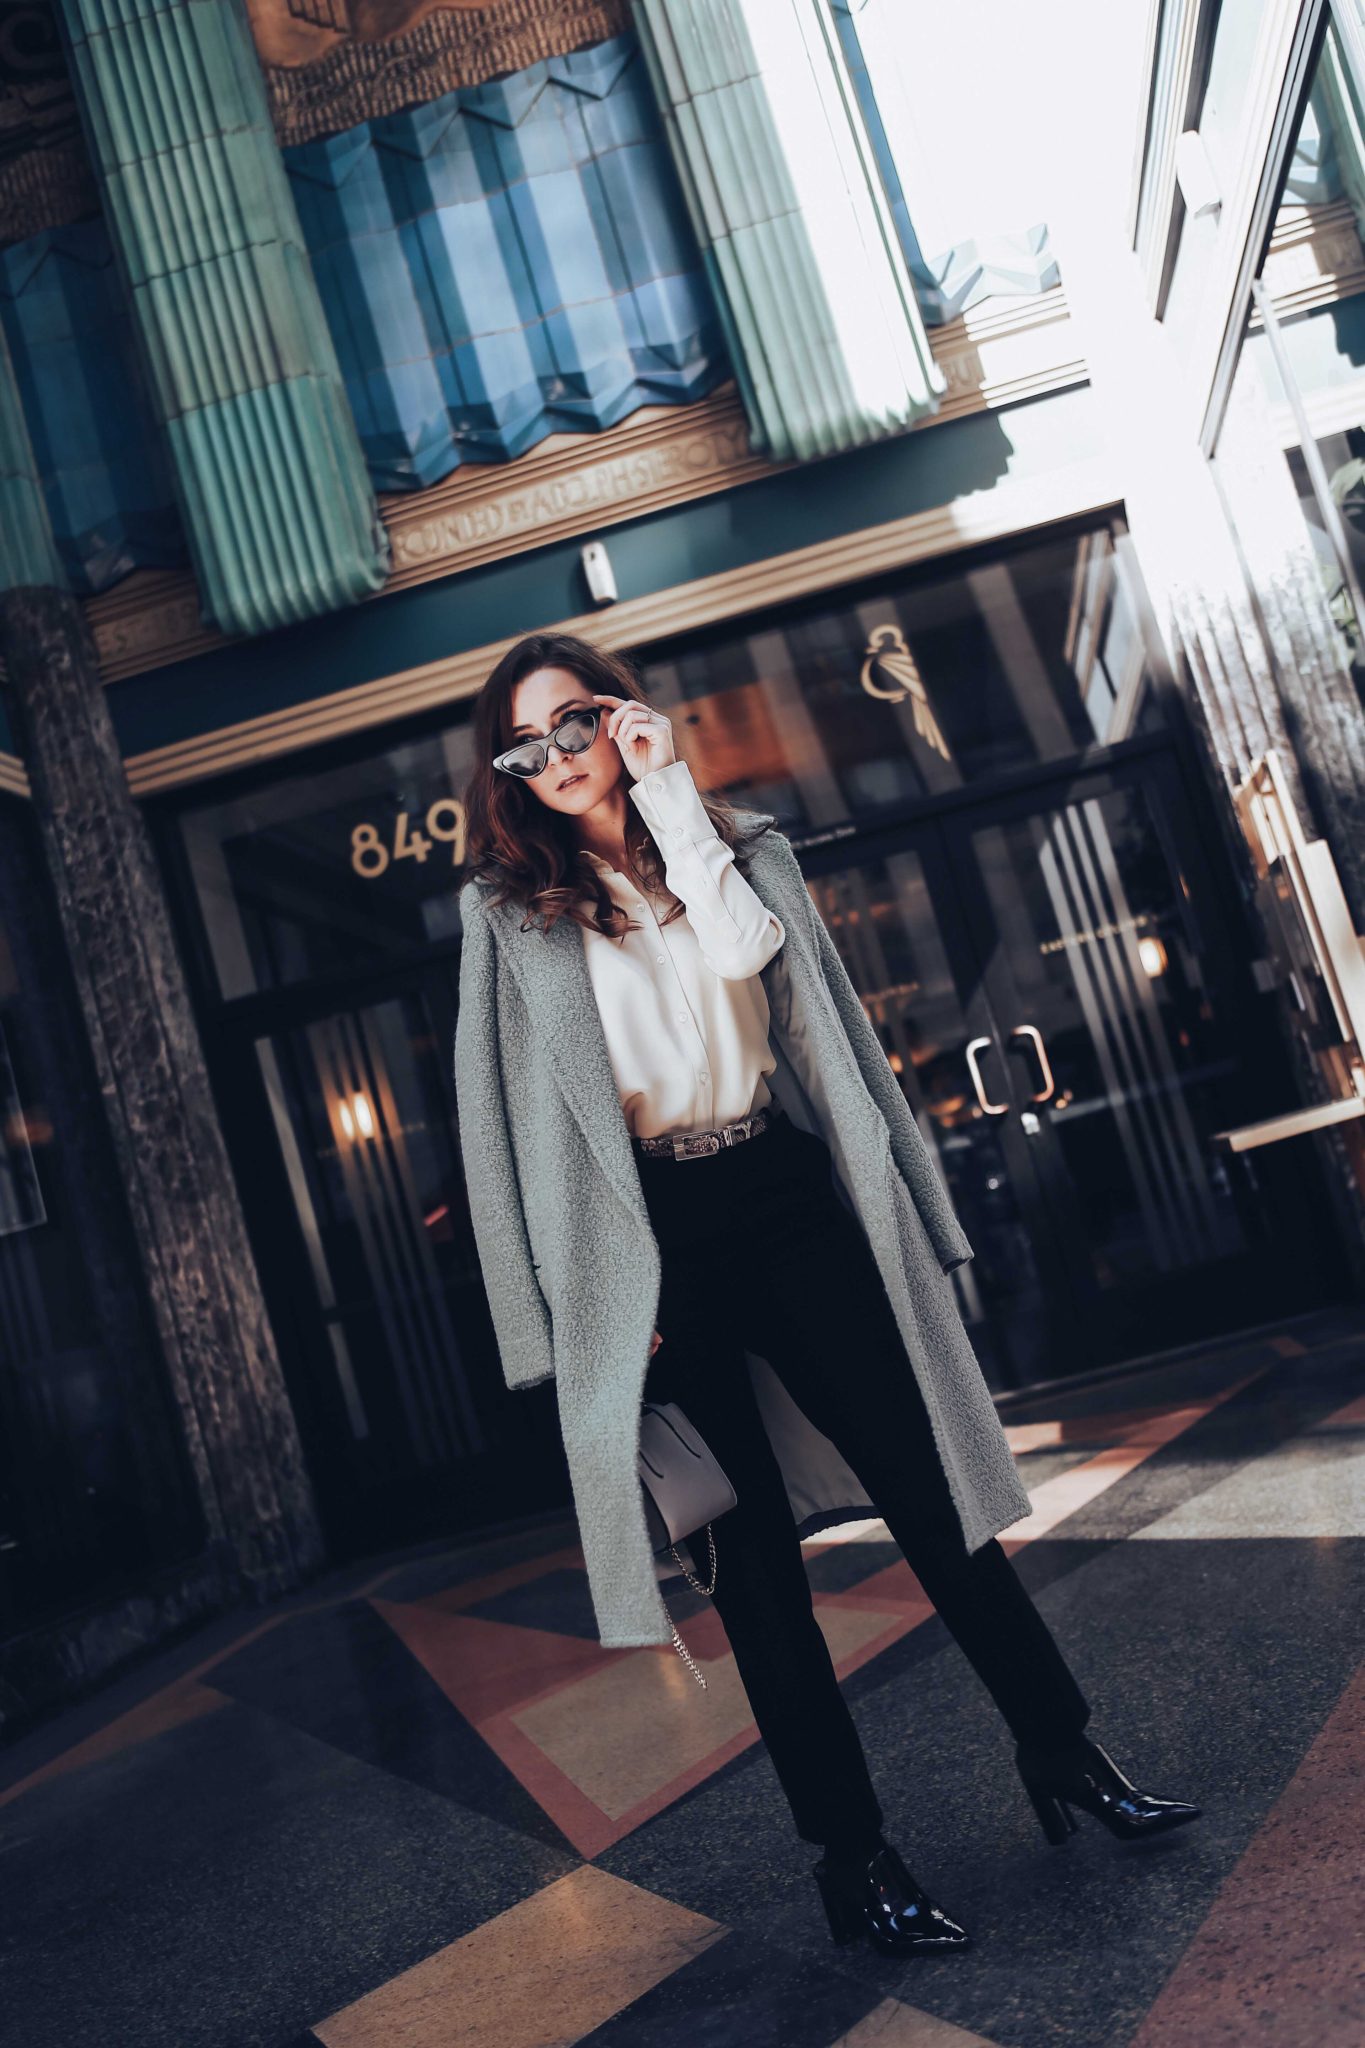 How to wear the business suits for women - Where to buy women suits: SuiStudio review and Check suits trend on Houseofcomil.com. Suits styled by Julia Comil French Fashion Blogger in Los Angeles